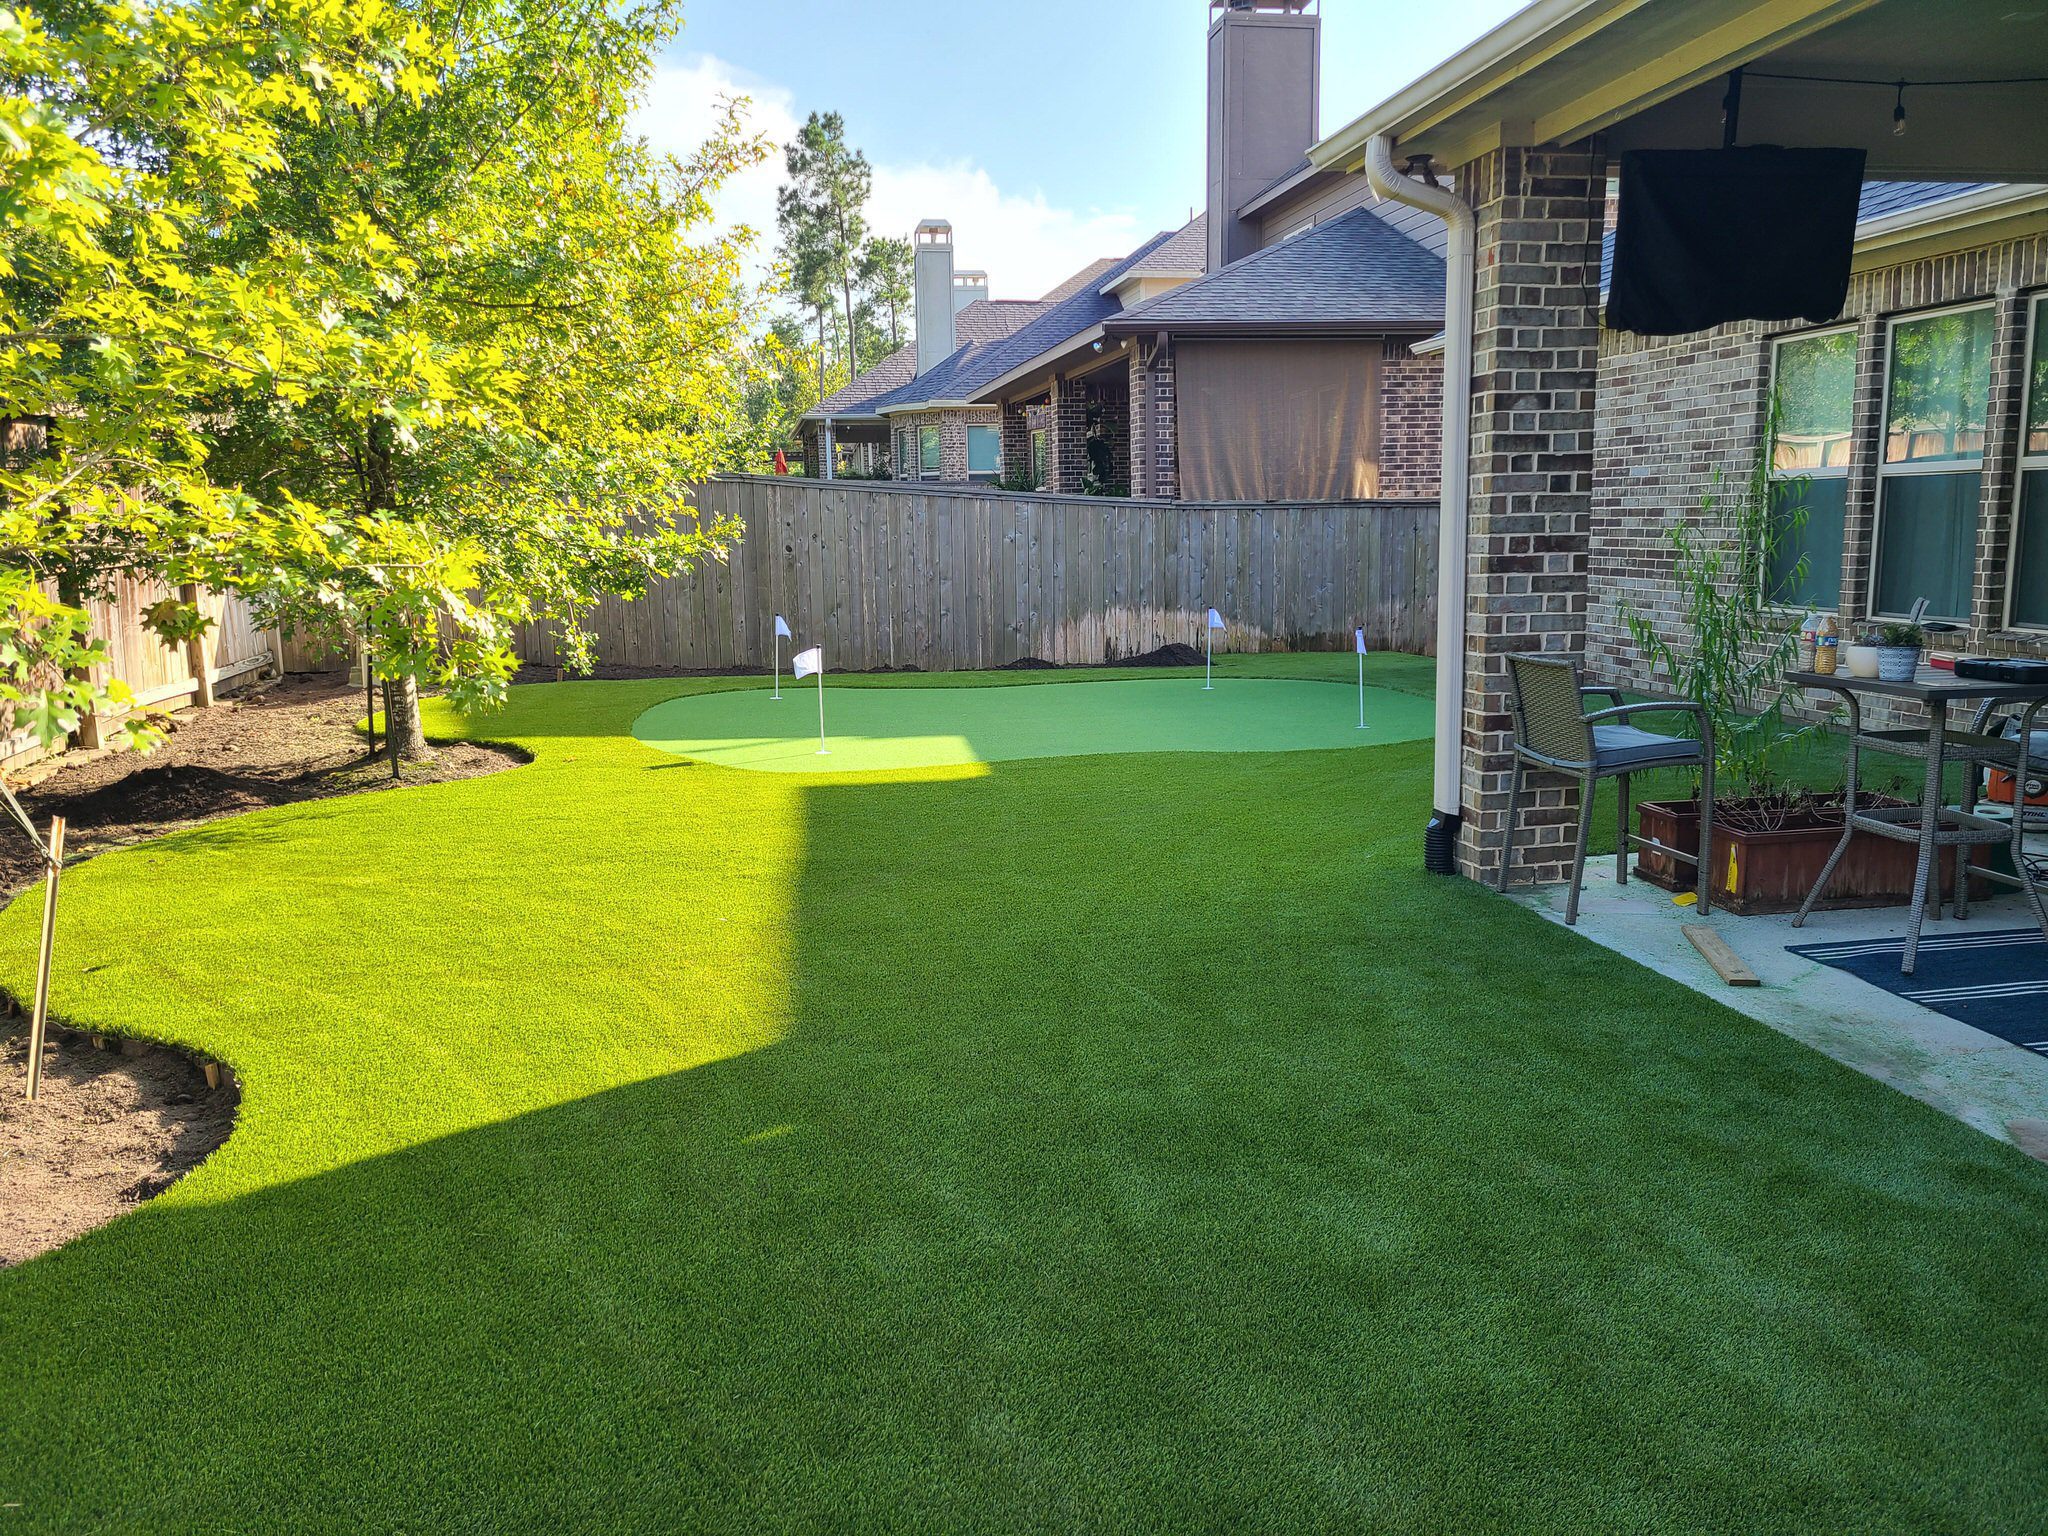 Synthetic grass is the best way to make your backyard into a safe and fun place for kids of all ages. These beautifully installed putting greens come at an unbeatable price, with no-hassle installation that can be done by professionals in record time!